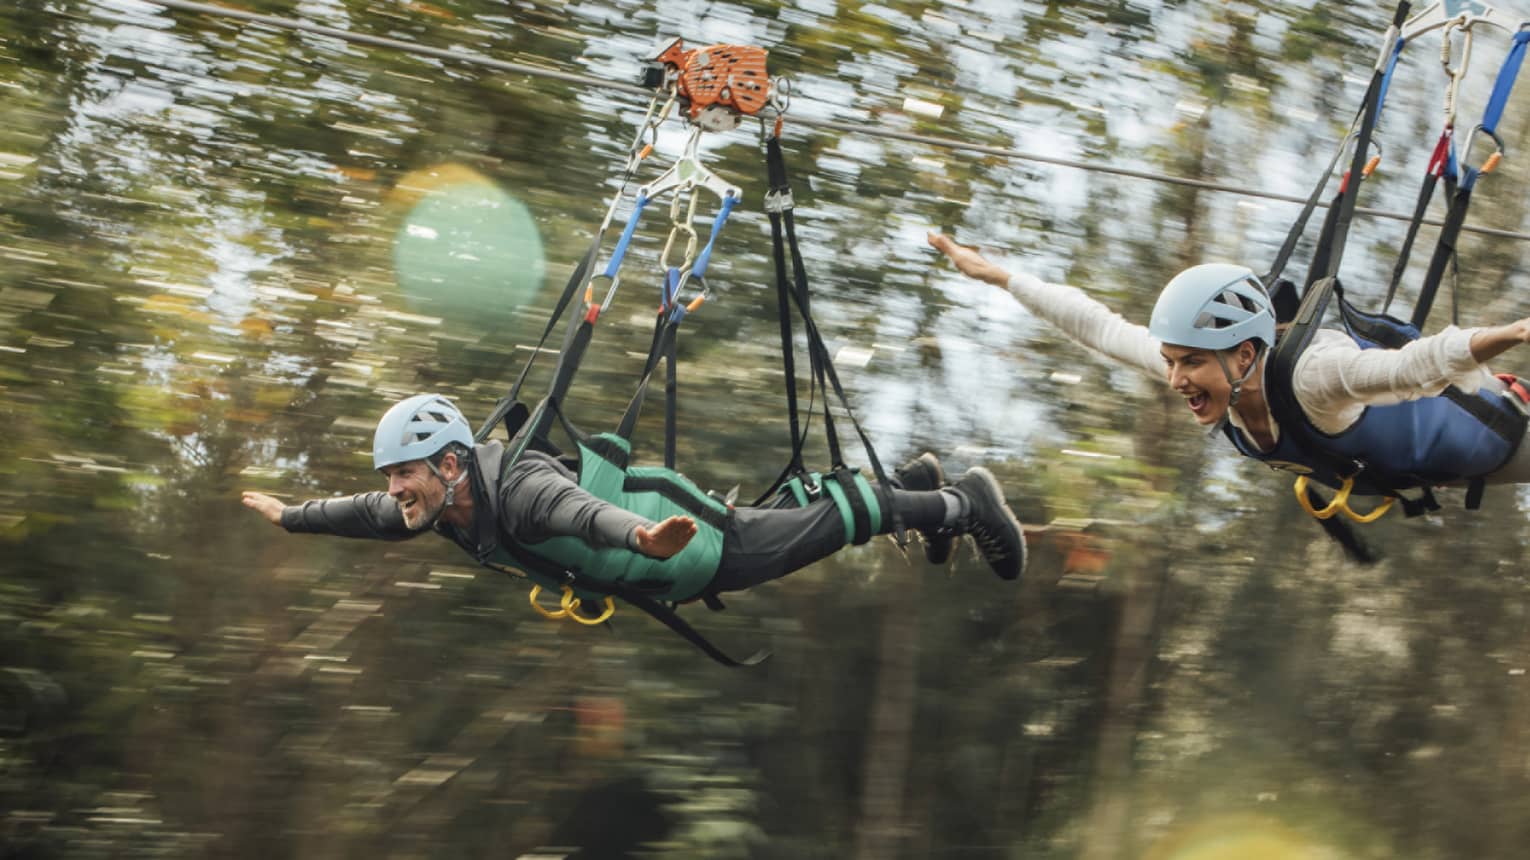 Close-up of a couple in full safety gear with wide smiles and arms outstretched as they zip-line past a blur of treetops.